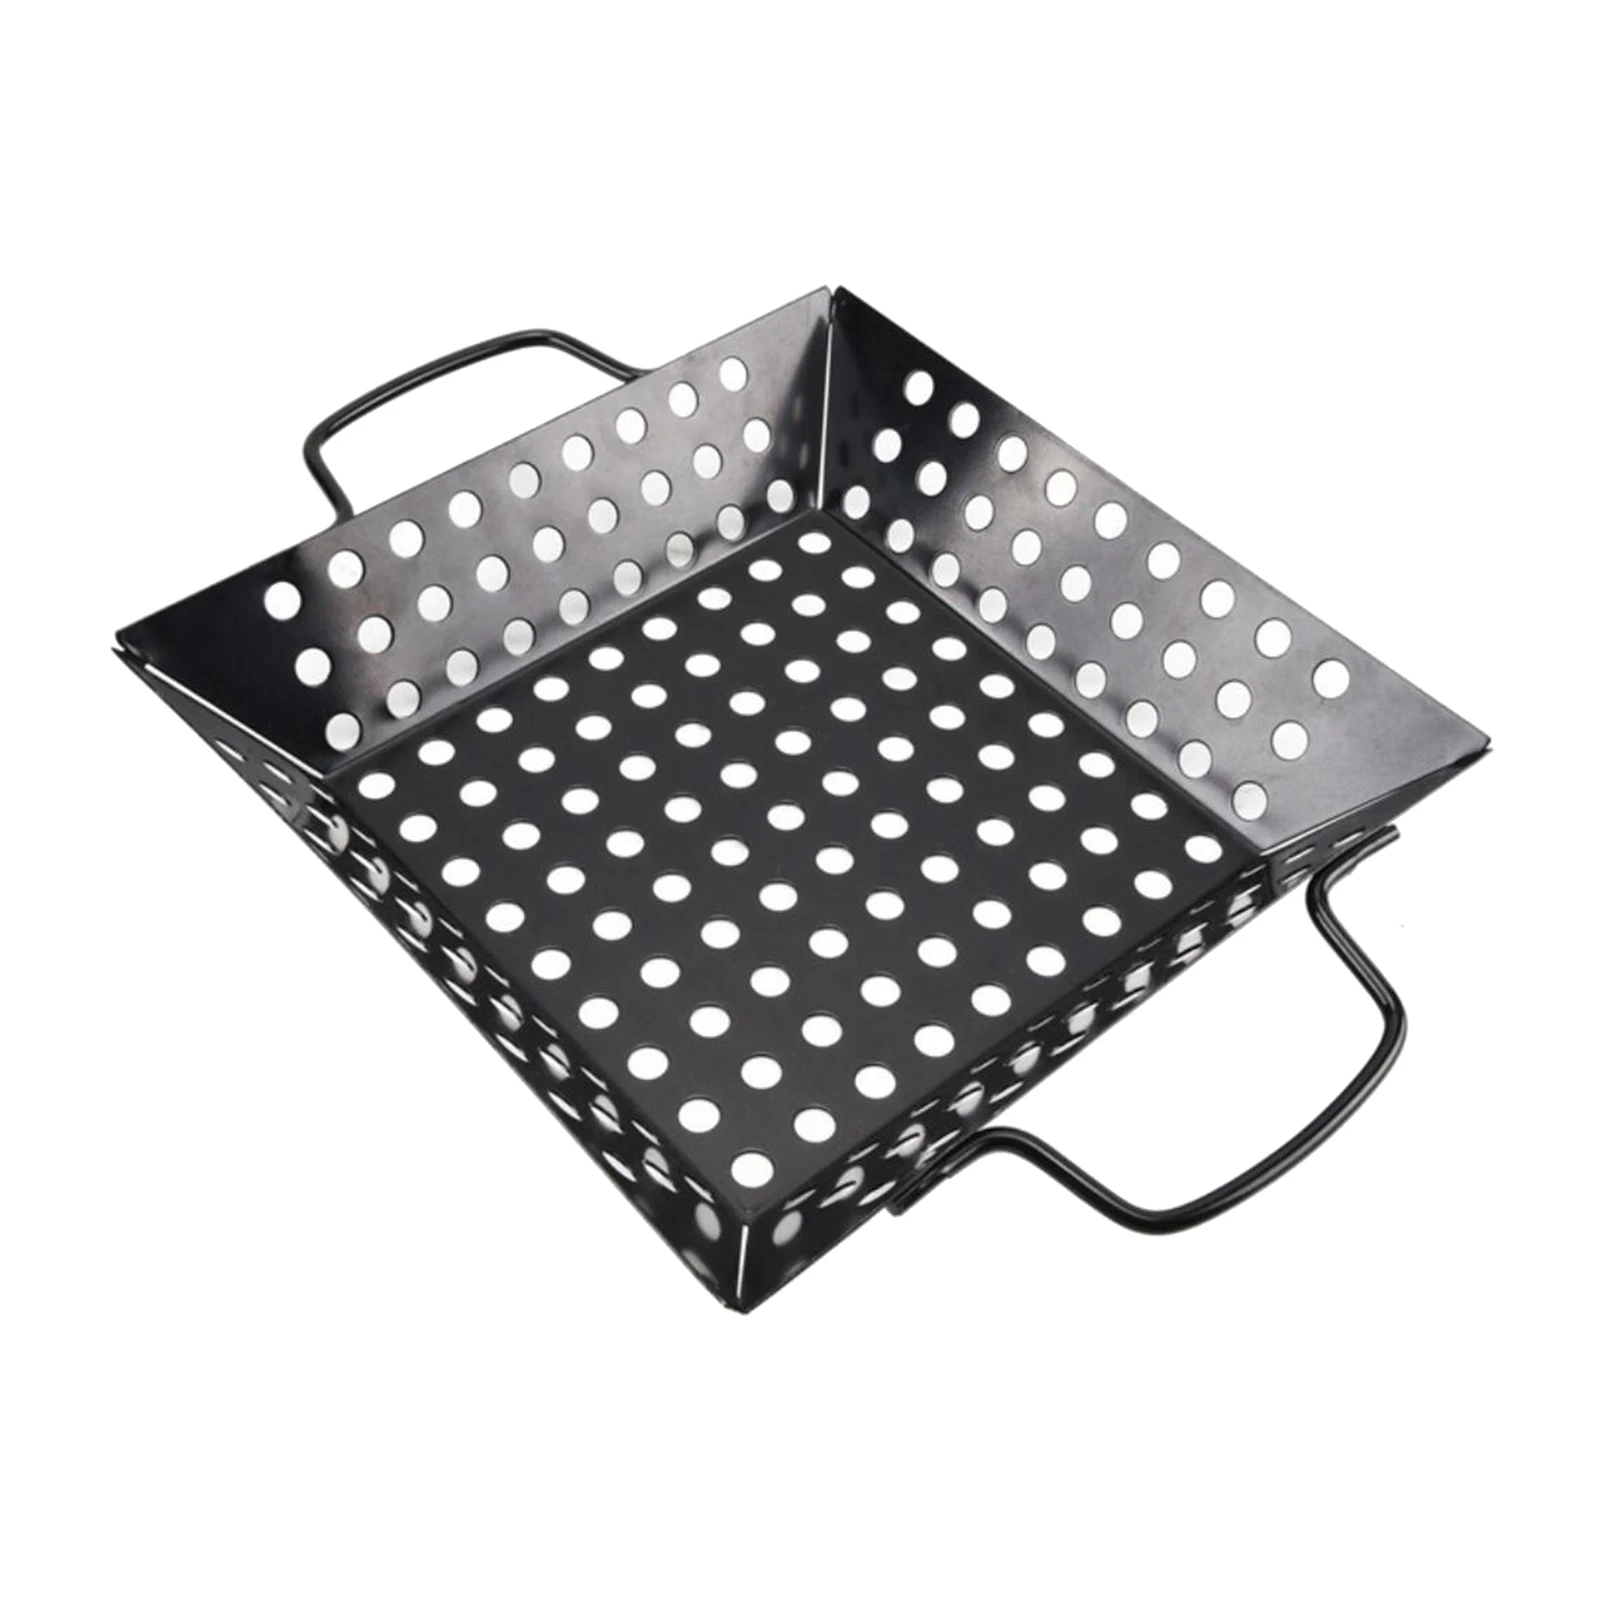 Non Stick Carbon Steel BBQ Vegetable Grill Square Grilling Basket Pan Outdoor Barbecue Utensils Grilling Tray for Meat Seafood